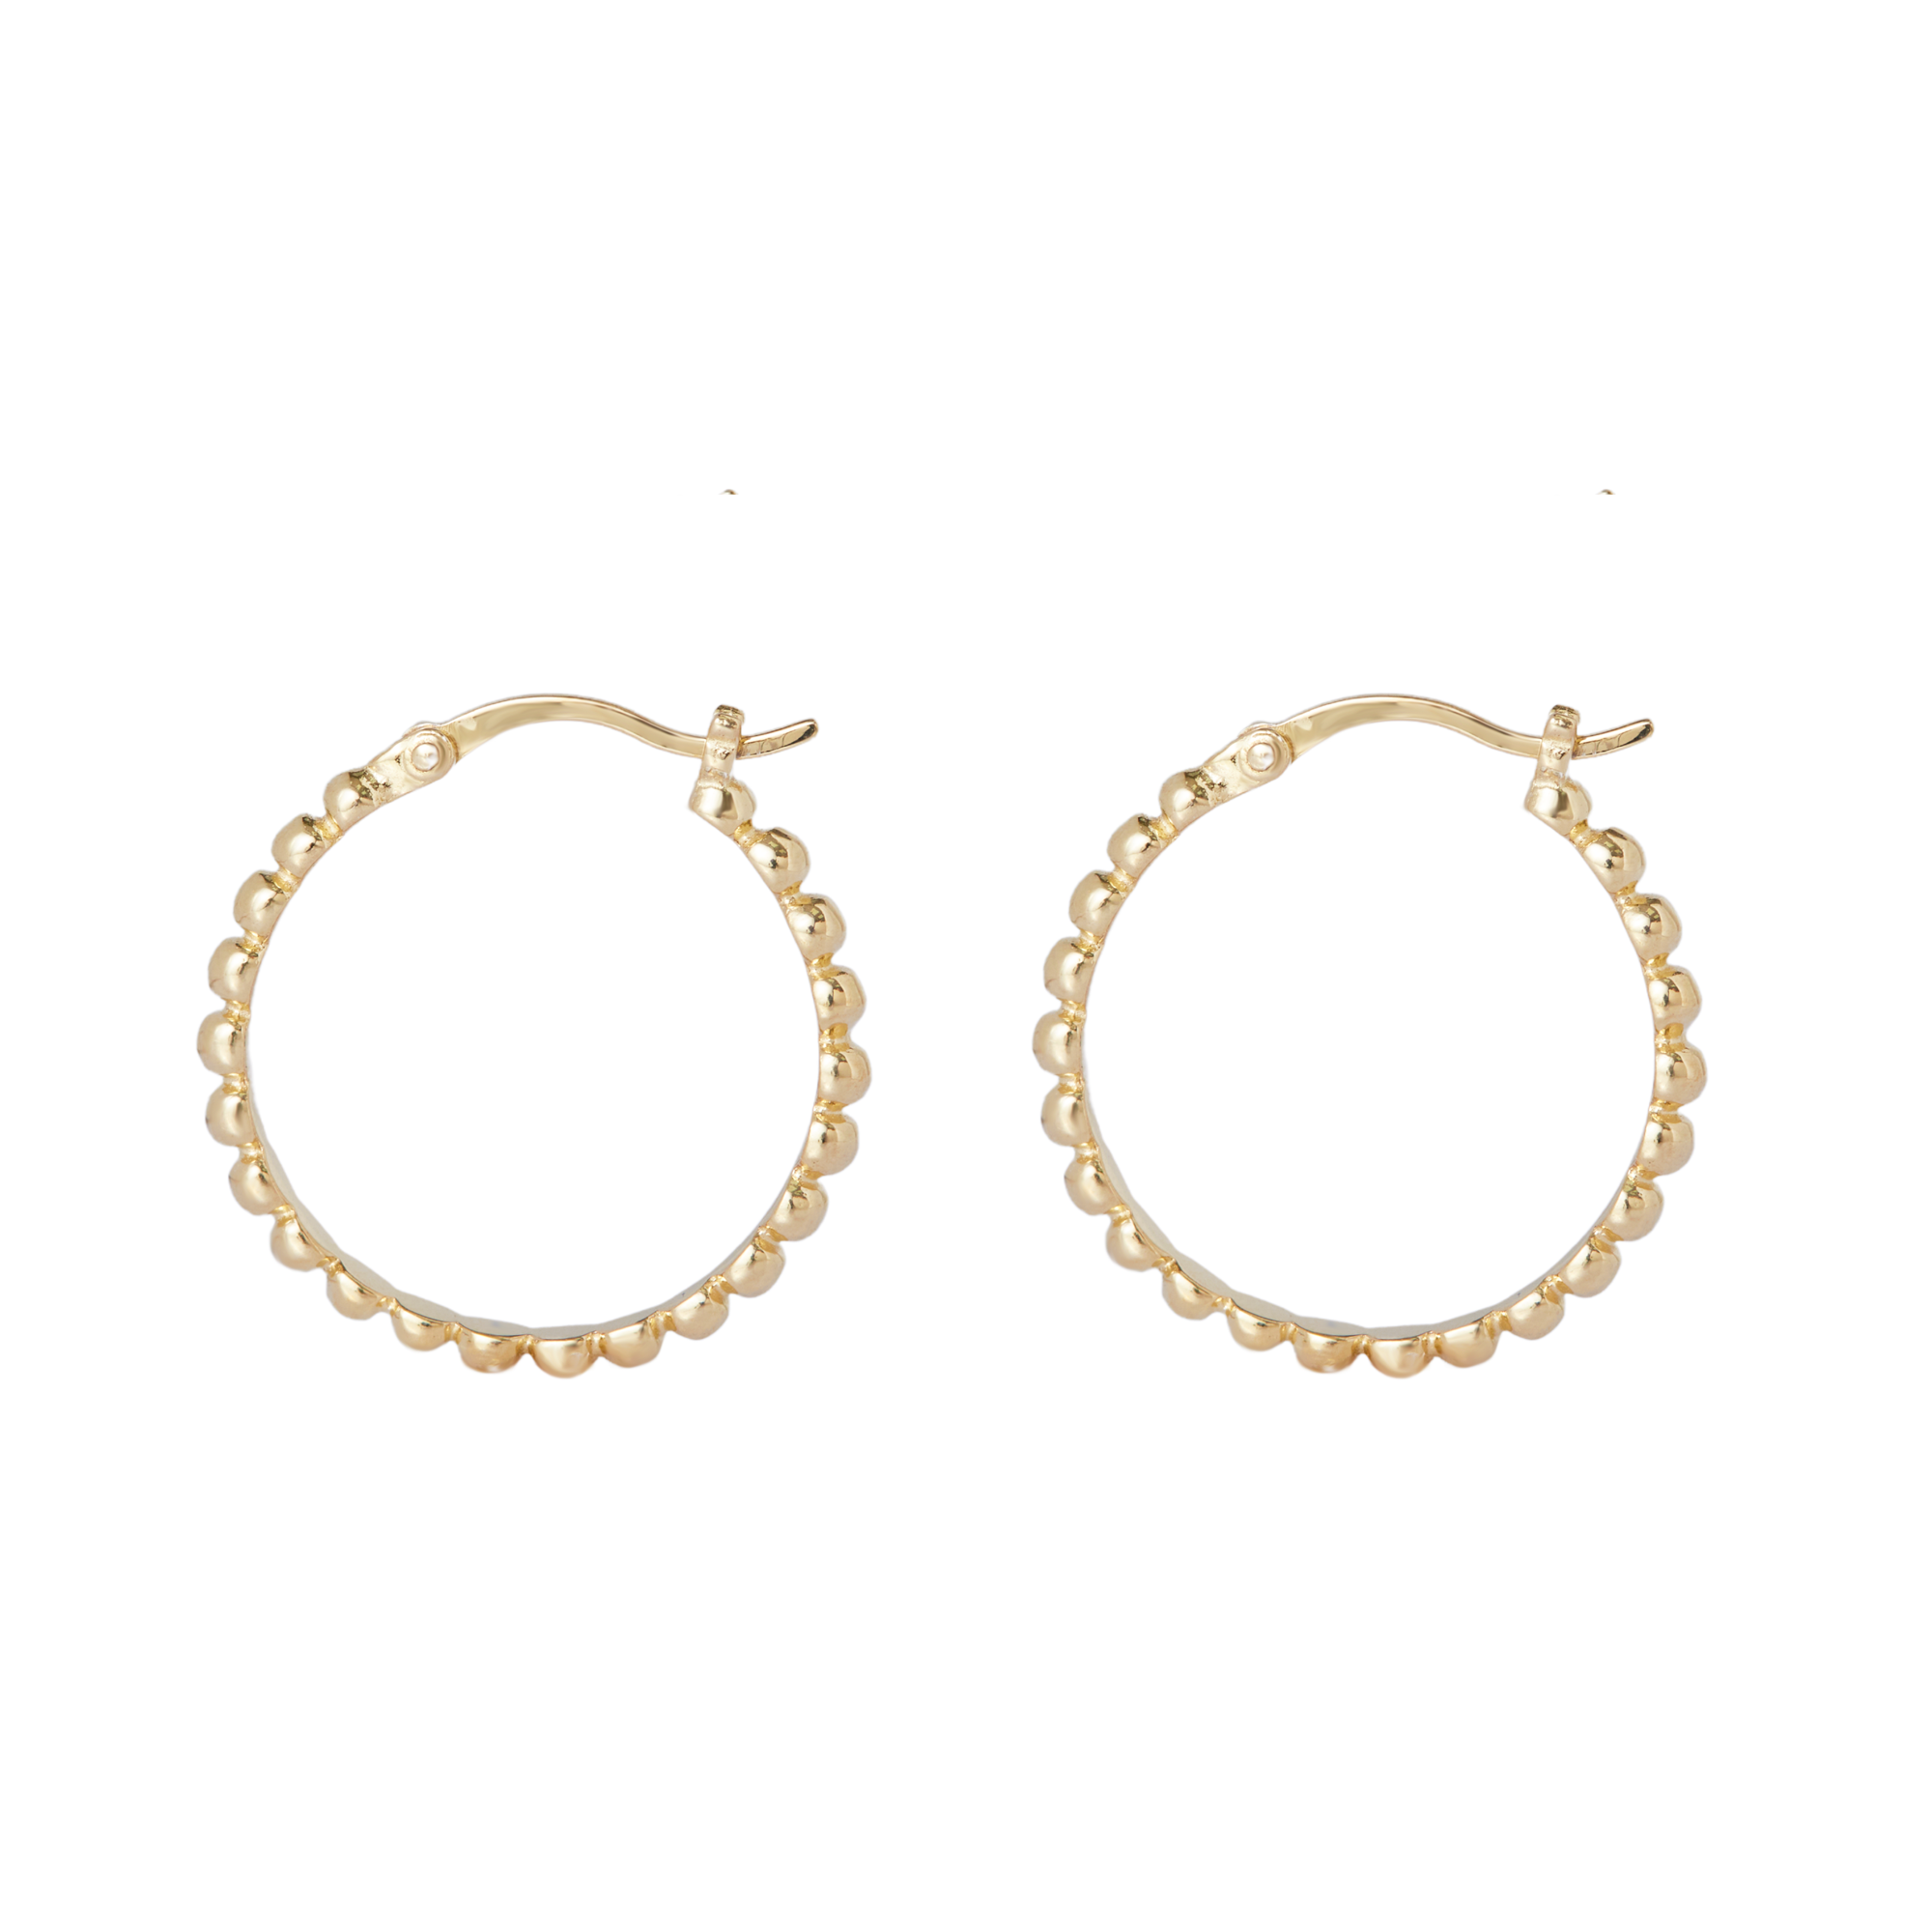 THE BEADED GOLD HOOP